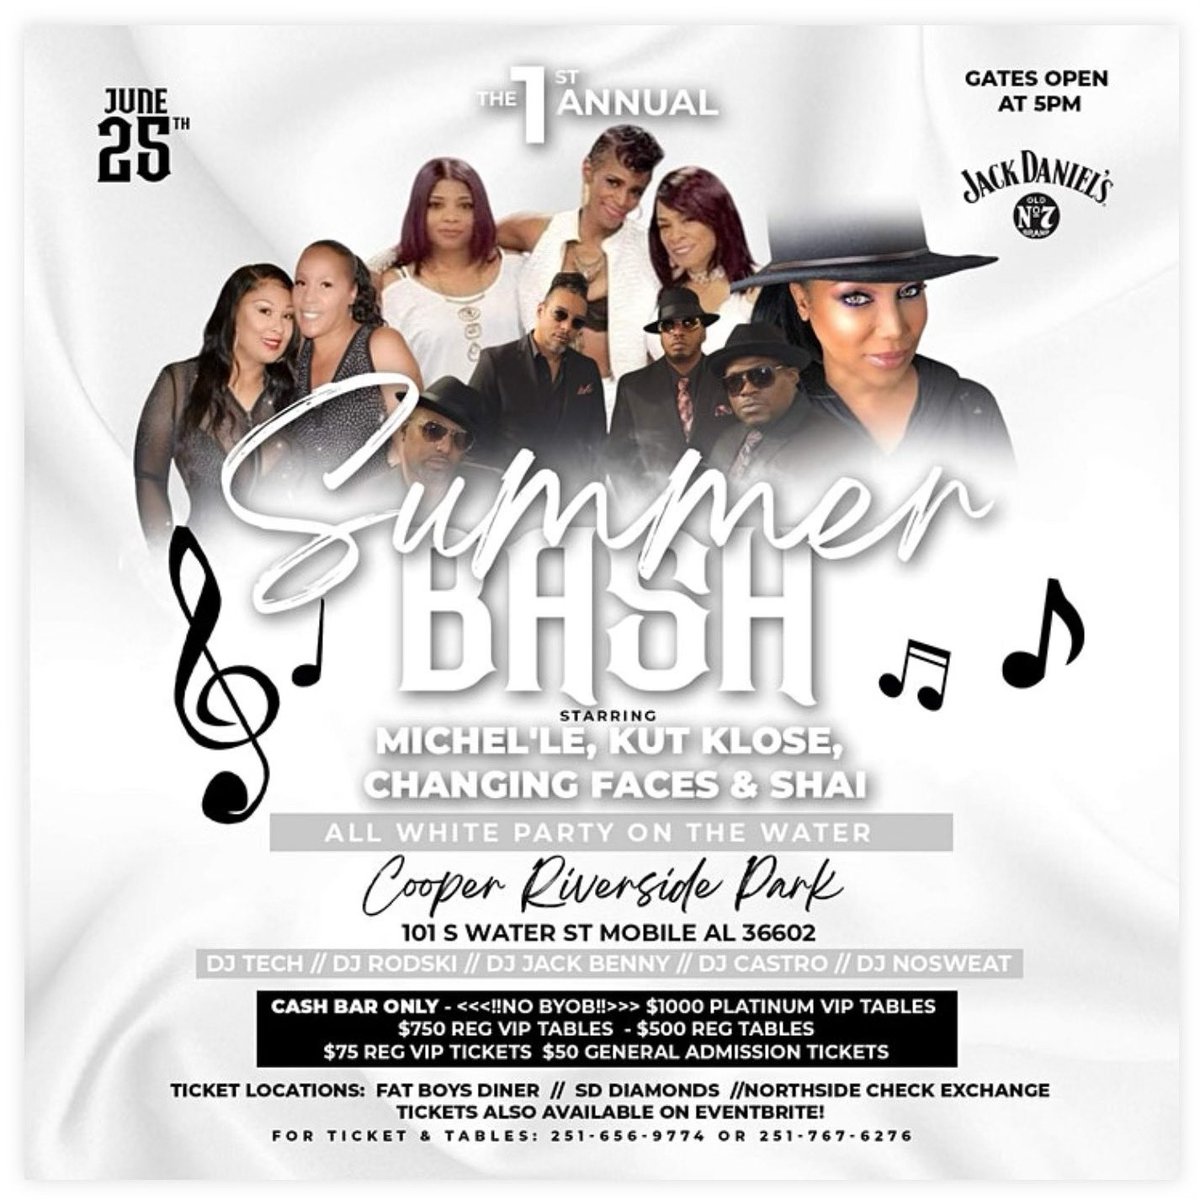 🚨🚨 MOBILE, AL.!!! Come rock with us at the 1st annual Summer Bash Saturday, June 25th! See you there! 🎶 🎤 
.
.
#Shai #Shairoglyphics #music #show #concert #musicians #entertainment #hitmakers #classics #90s #90srnb #90smusic #rnb #90srnbmusic #rnbmusic #rnbartist